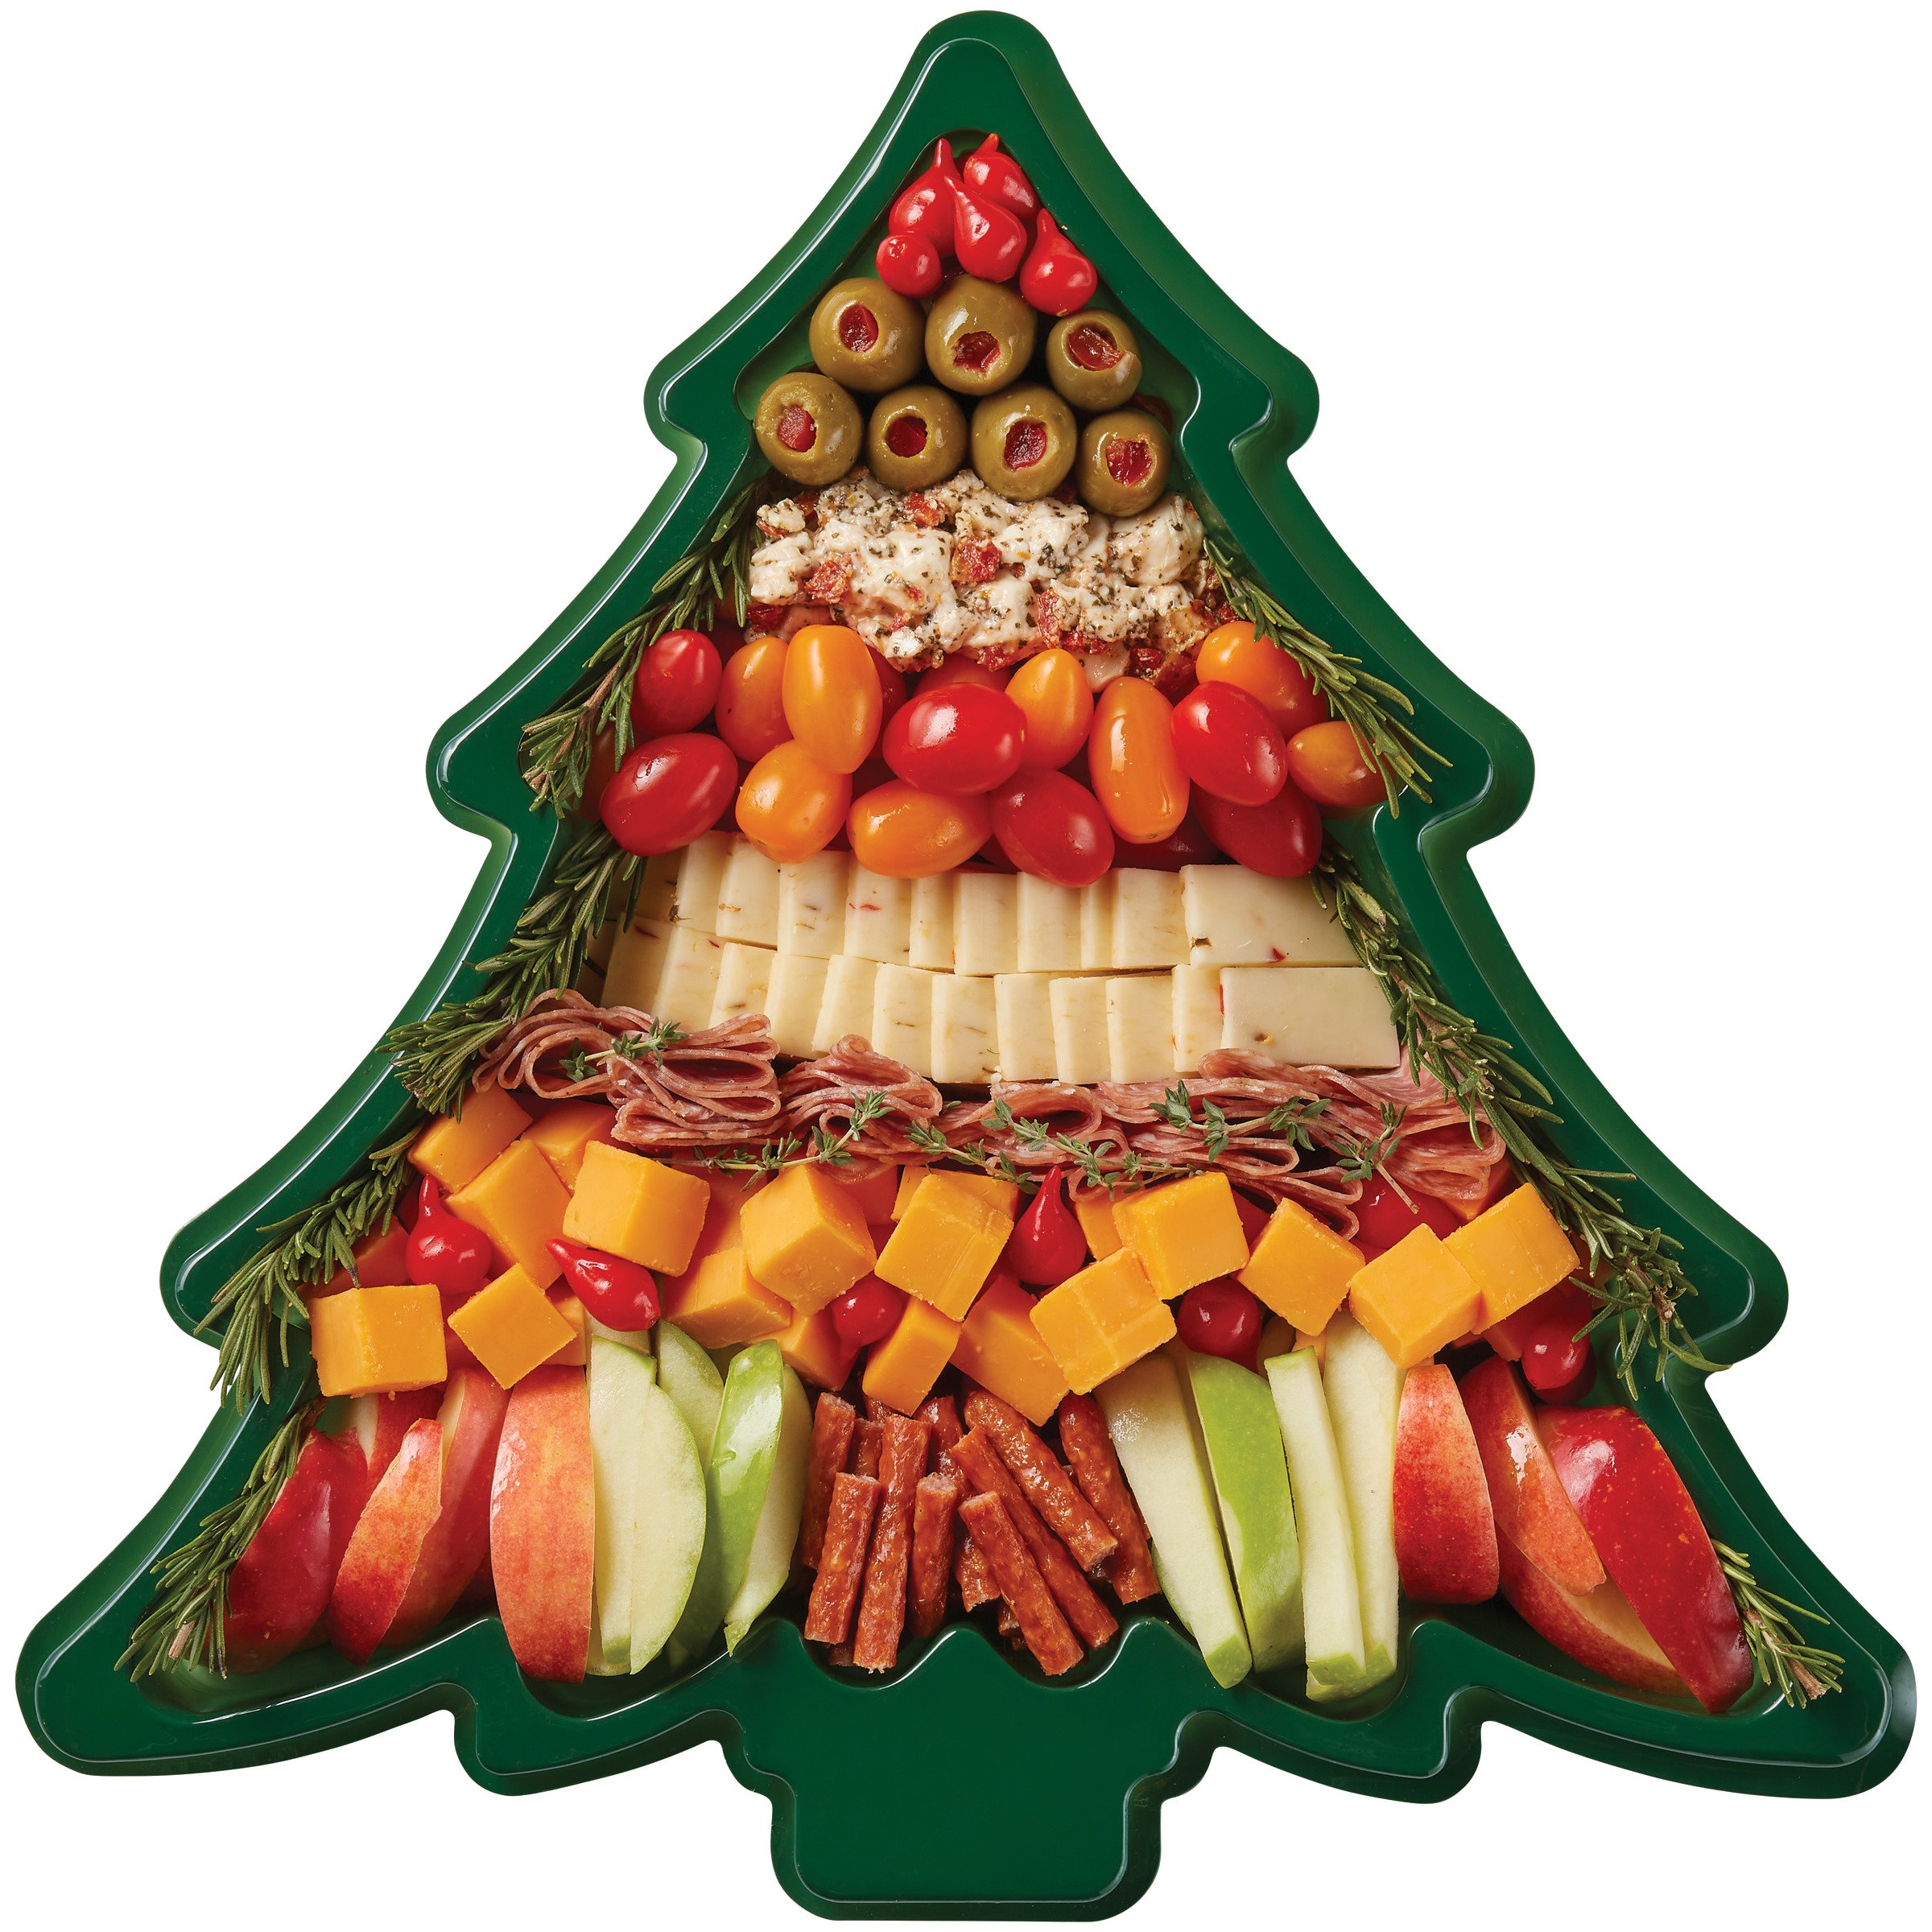 H-E-B Deli Cheese Board - Be Merry - Shop Standard Party Trays at H-E-B